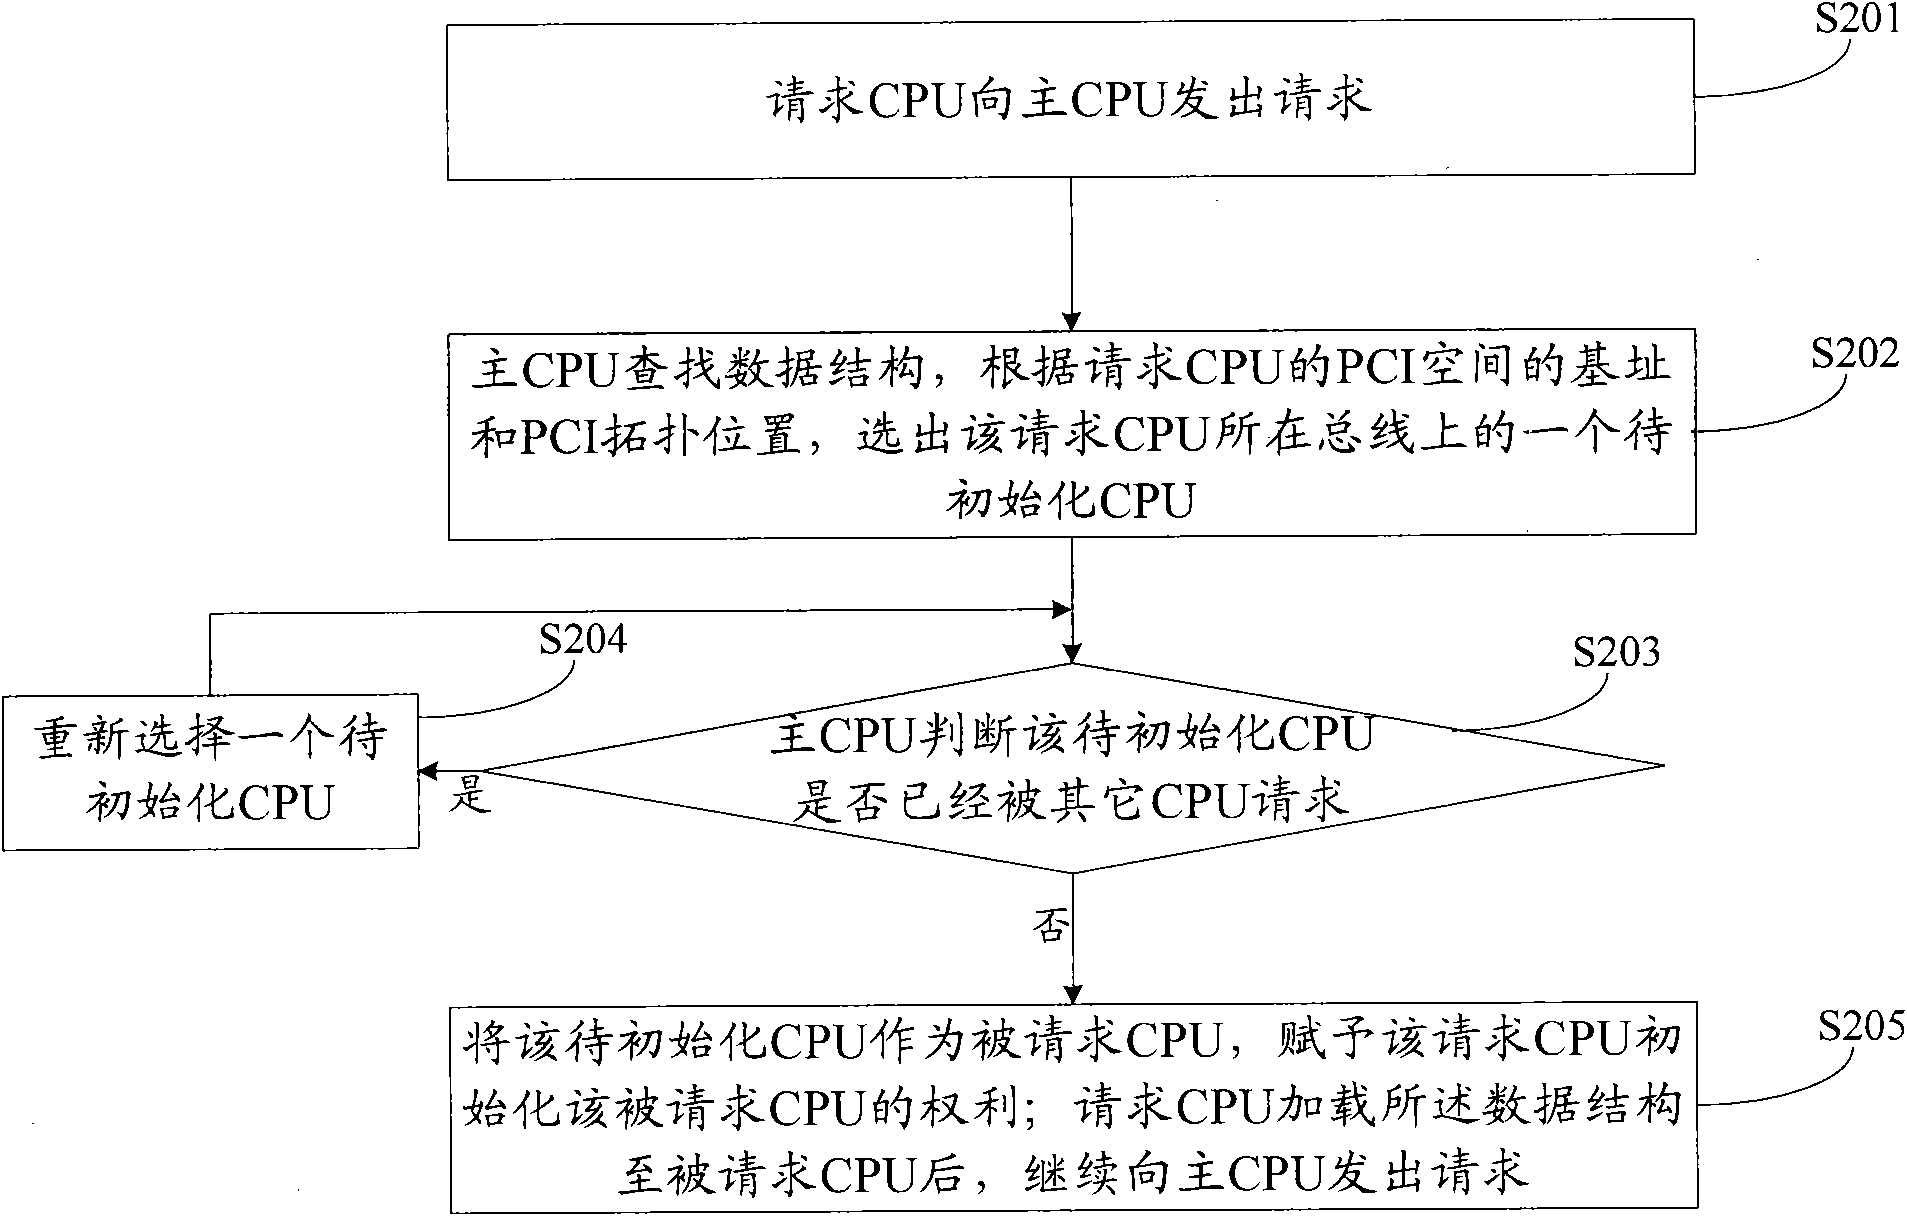 Multi-CPU (Central Processing Unit)system starting method and module based on PCI/PCIe (Peripheral Component Interconnect/Peripheral Component Interconnect Express) bus